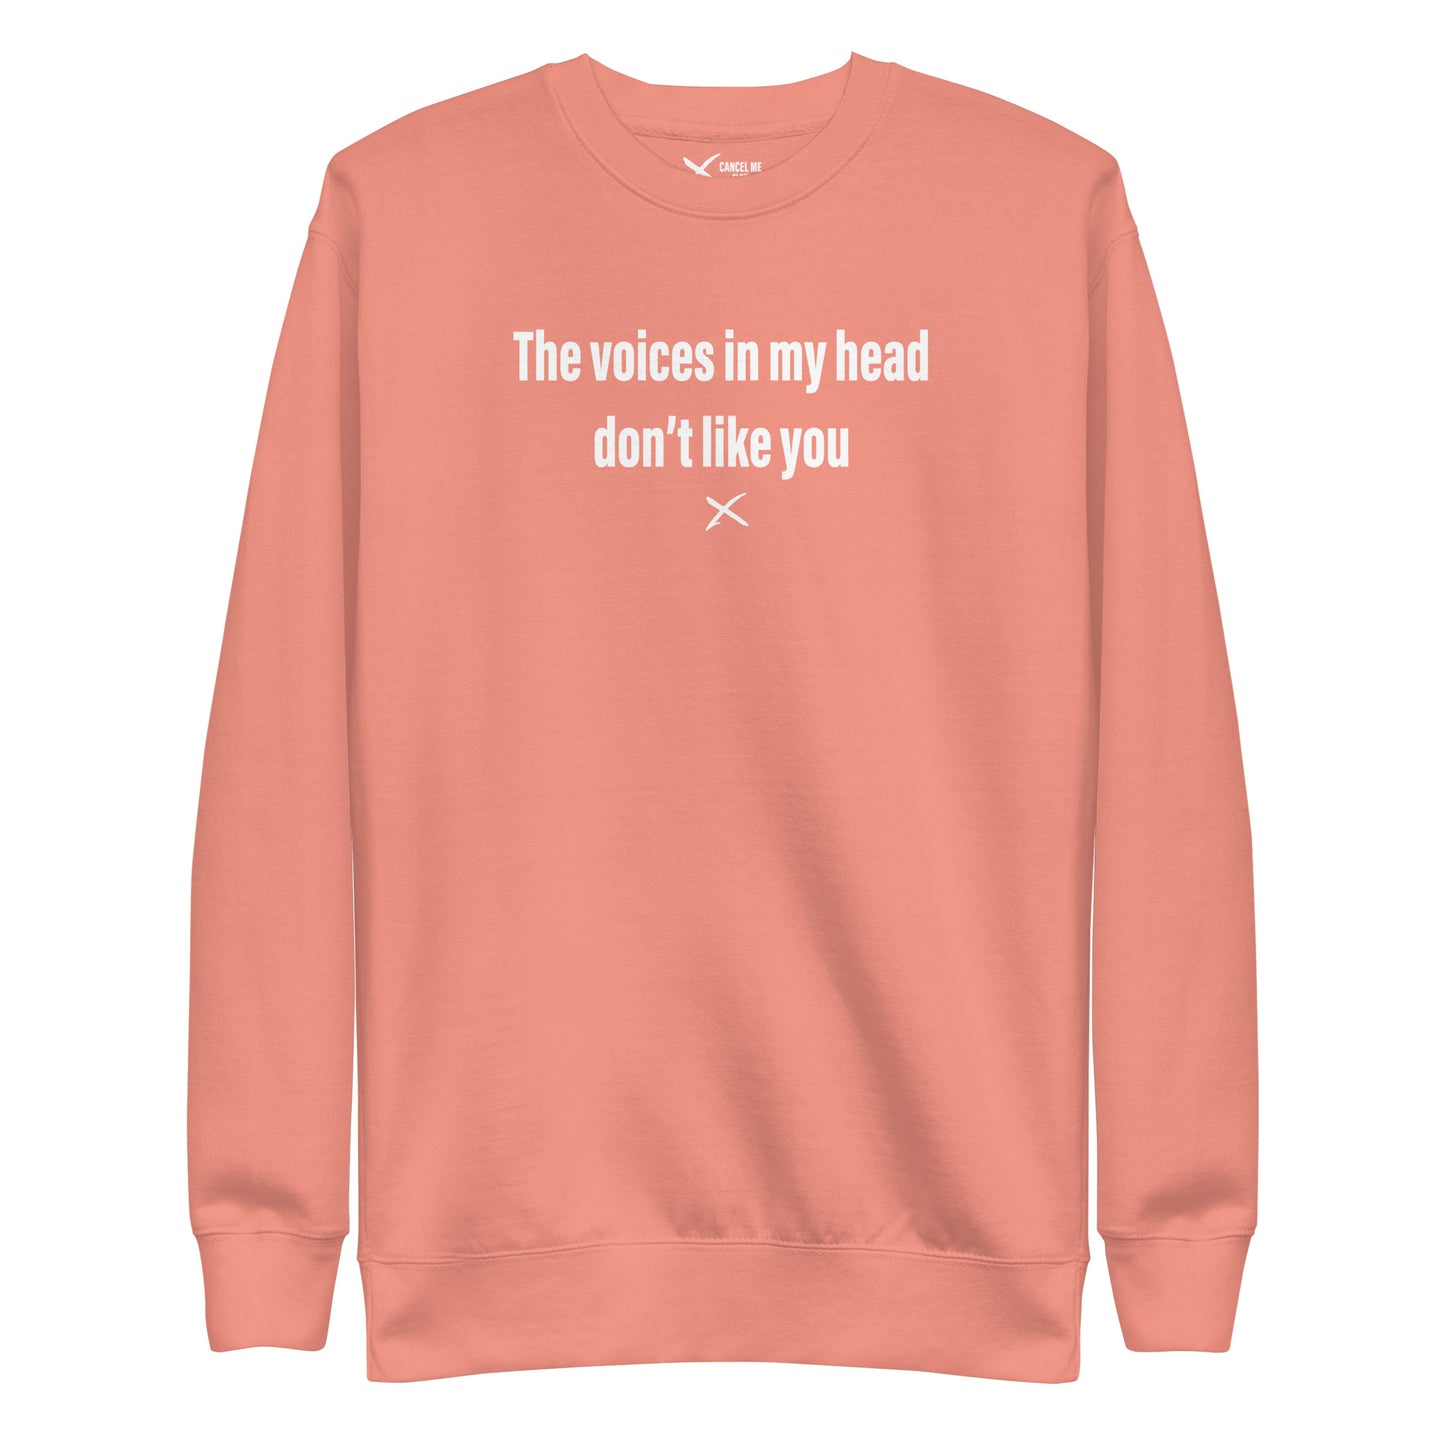 The voices in my head don't like you - Sweatshirt